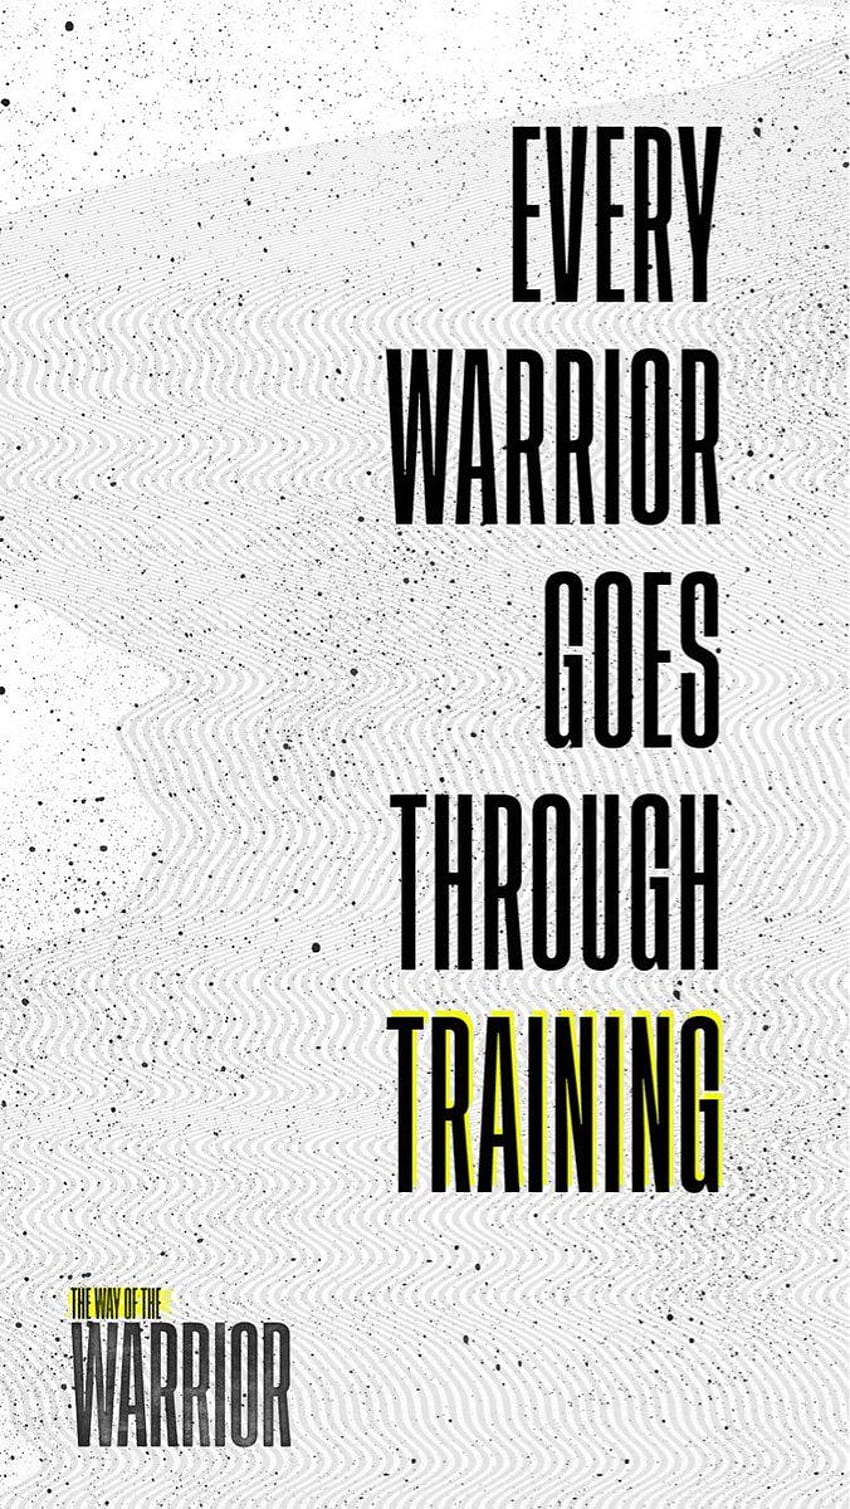 Oasis Church LA - The Way of the Warrior. Week 3 What has been your battlecry this week? Join us Sunday as we continue this series! HD phone wallpaper